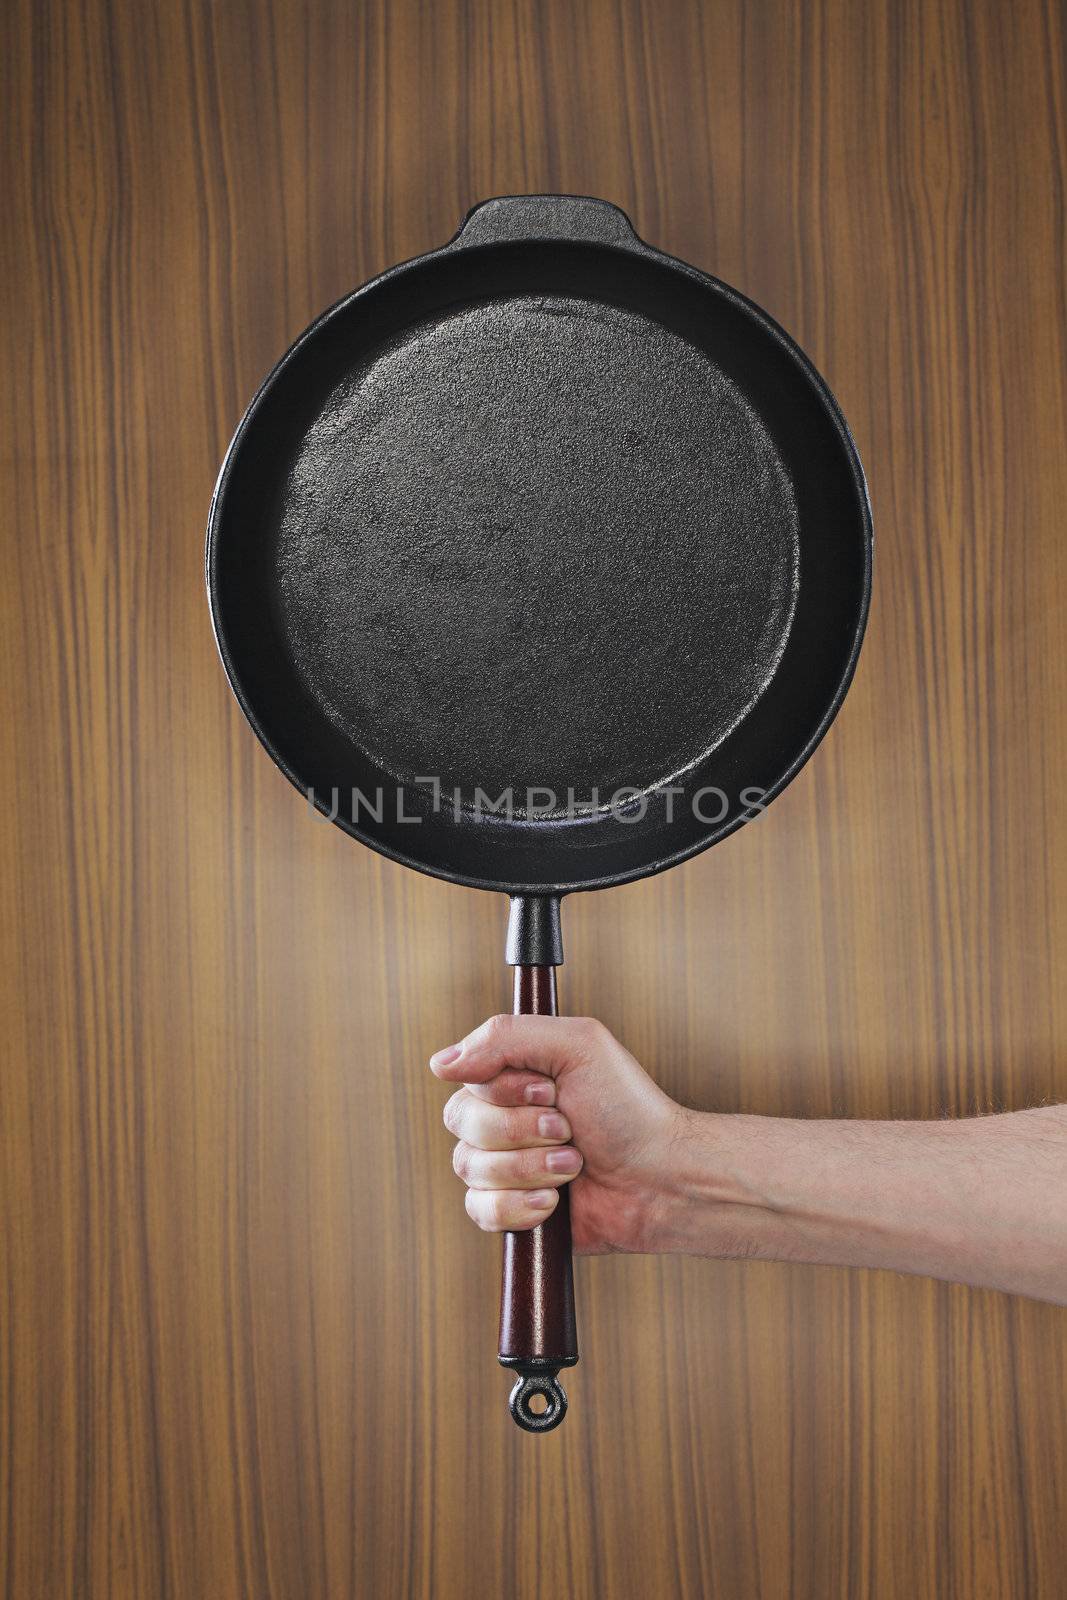 Frying pan by Stocksnapper